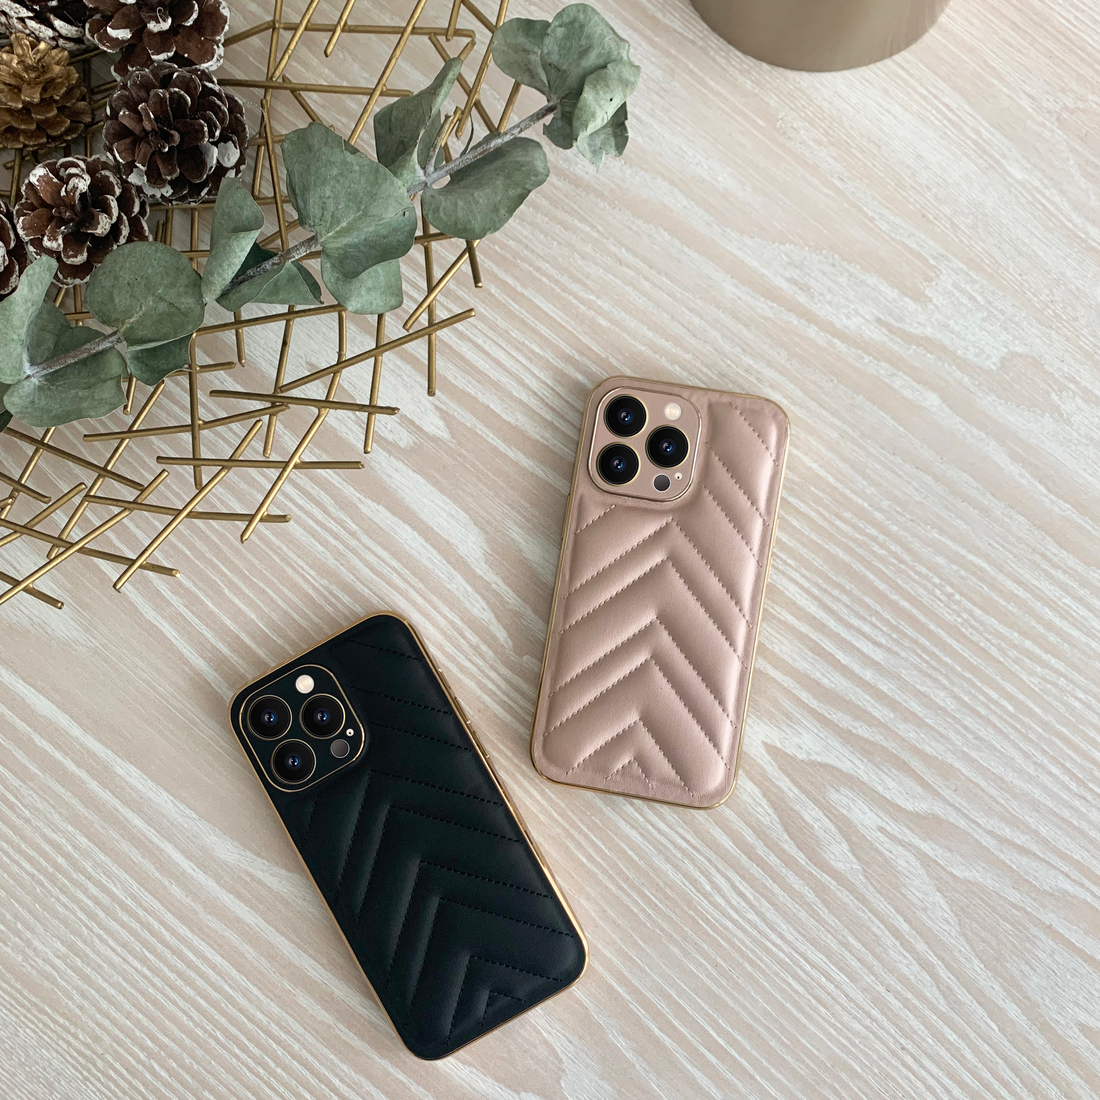 Vegan Leather Phone Cases - The Ethical Elegance Your Phone Deserves